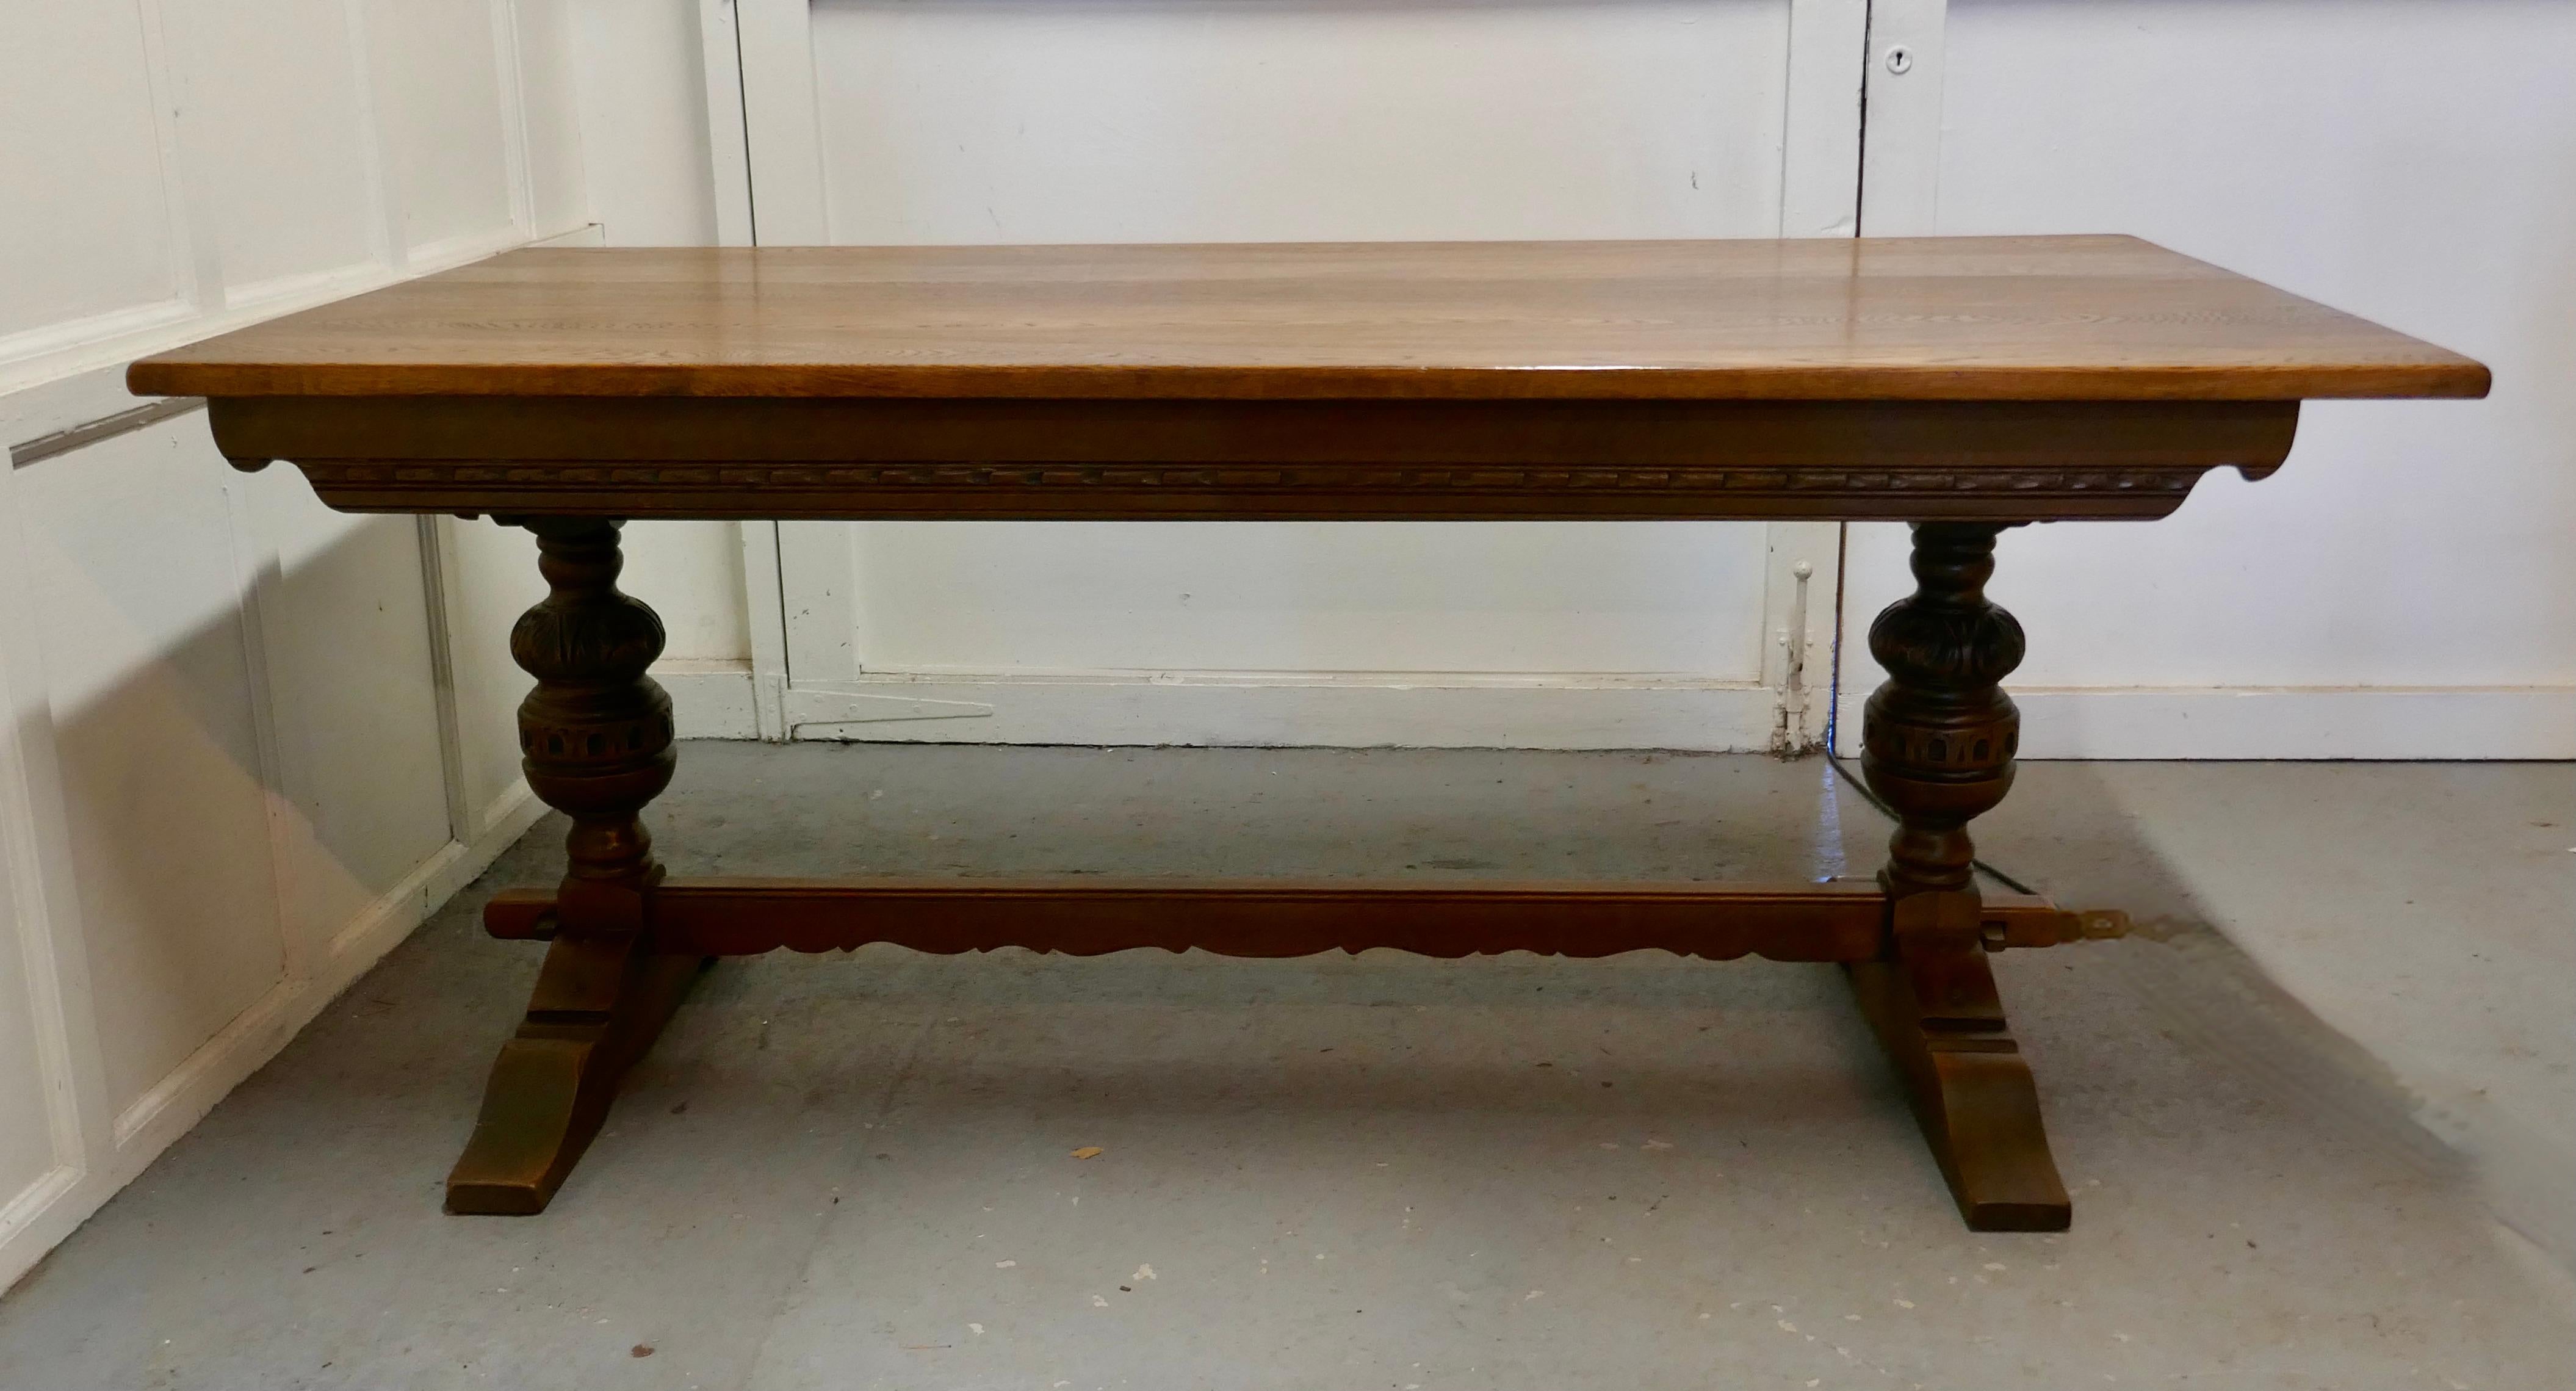 Victorian Oak Refectory Table  

This is a good sturdy table, it has a solid 1” thick oak top made and it has a good natural patina, the legs are in the refectory style carved with a floor Stretcher and bulbous  
The table is good and sound and it